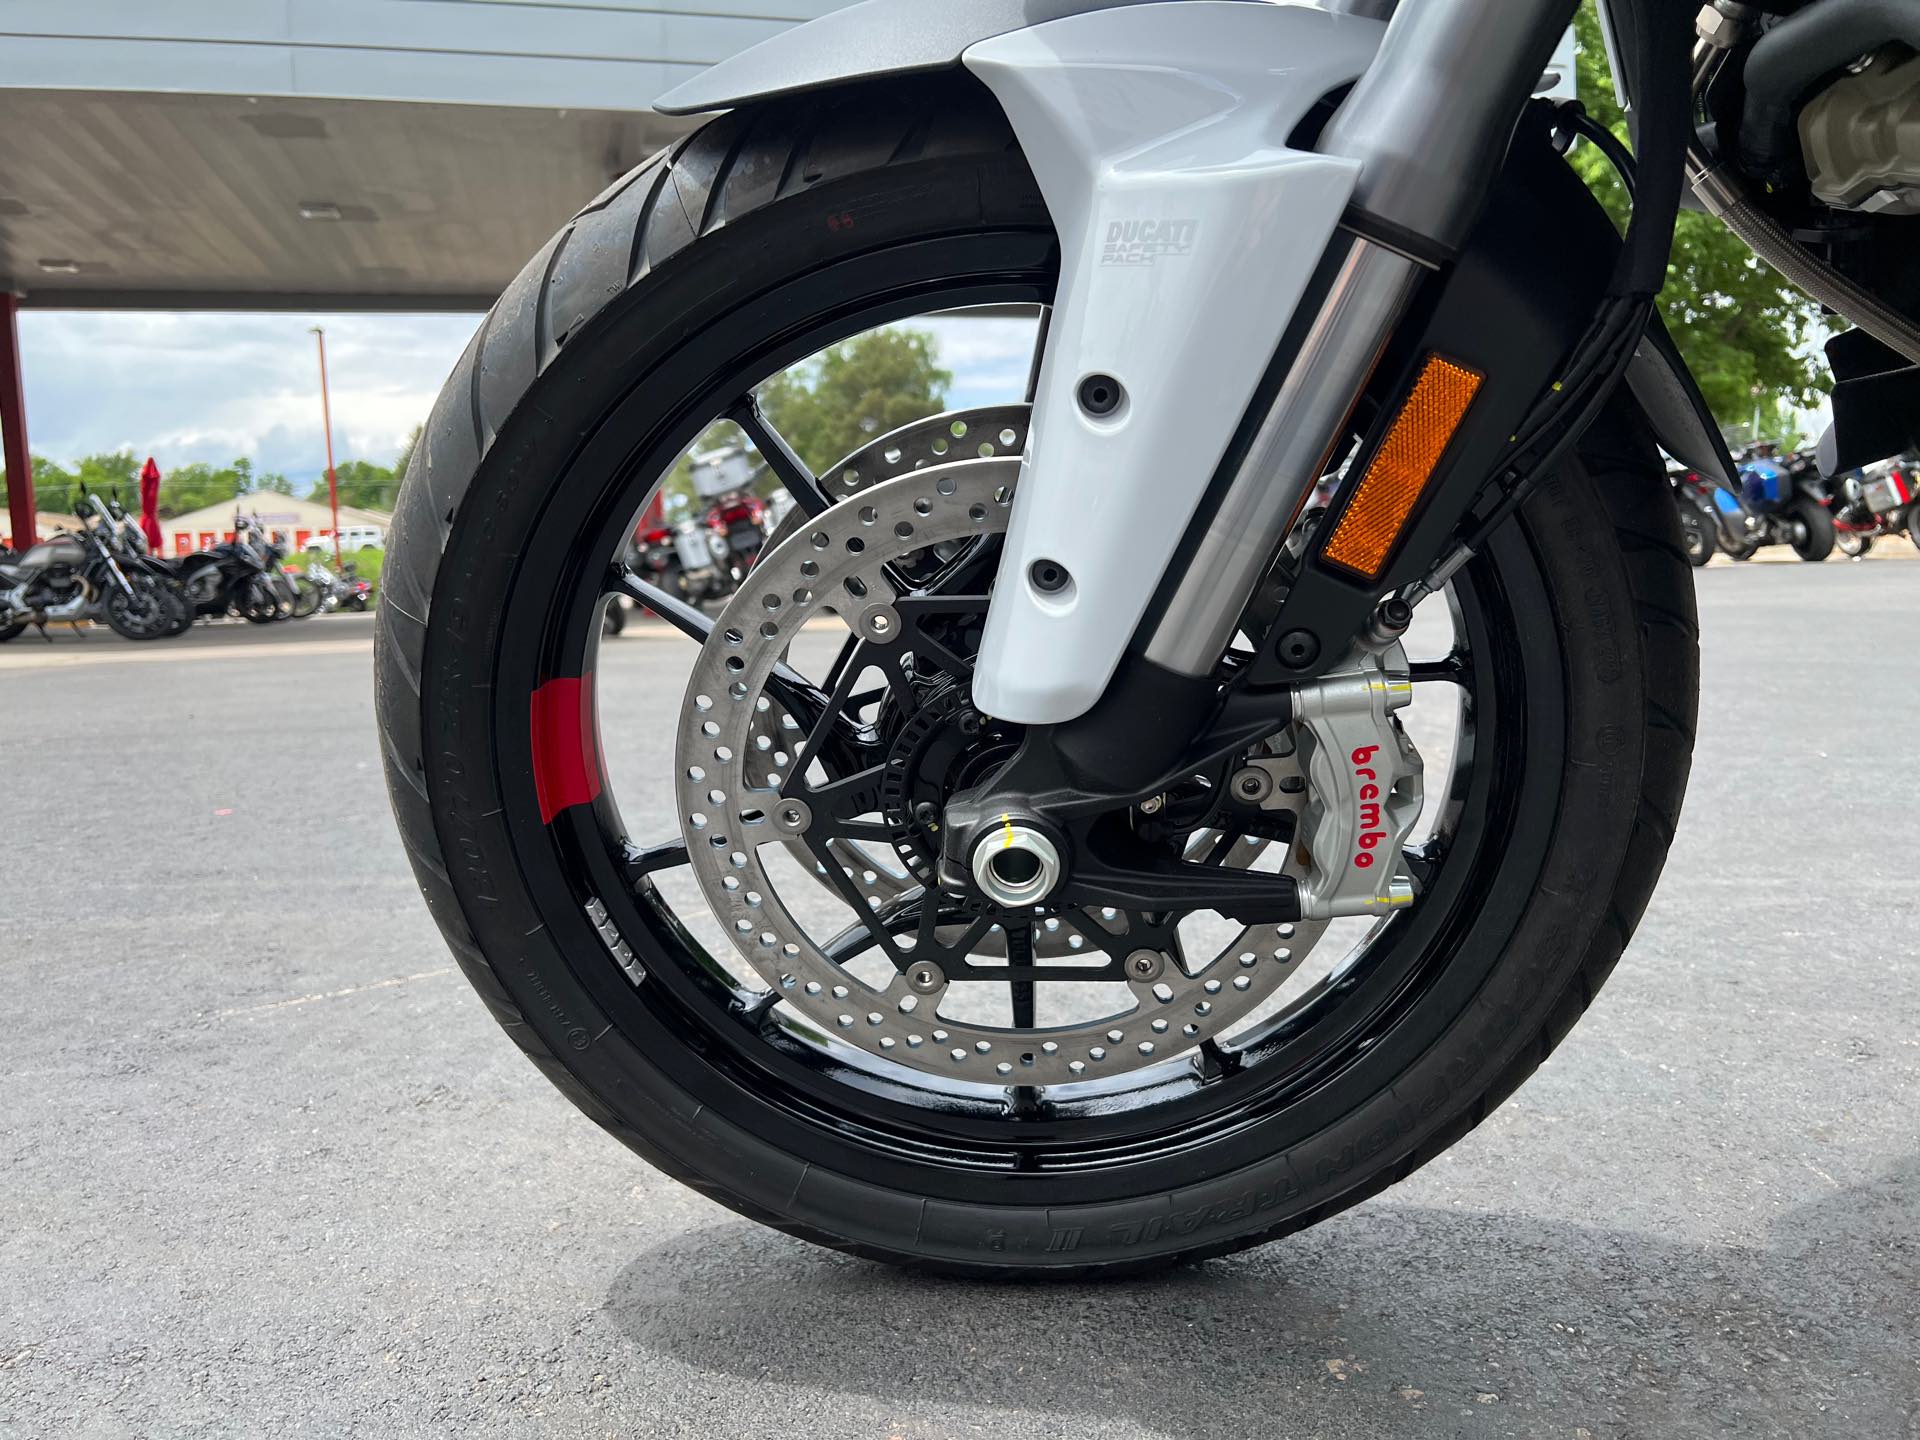 2023 Ducati Multistrada V4 S at Aces Motorcycles - Fort Collins